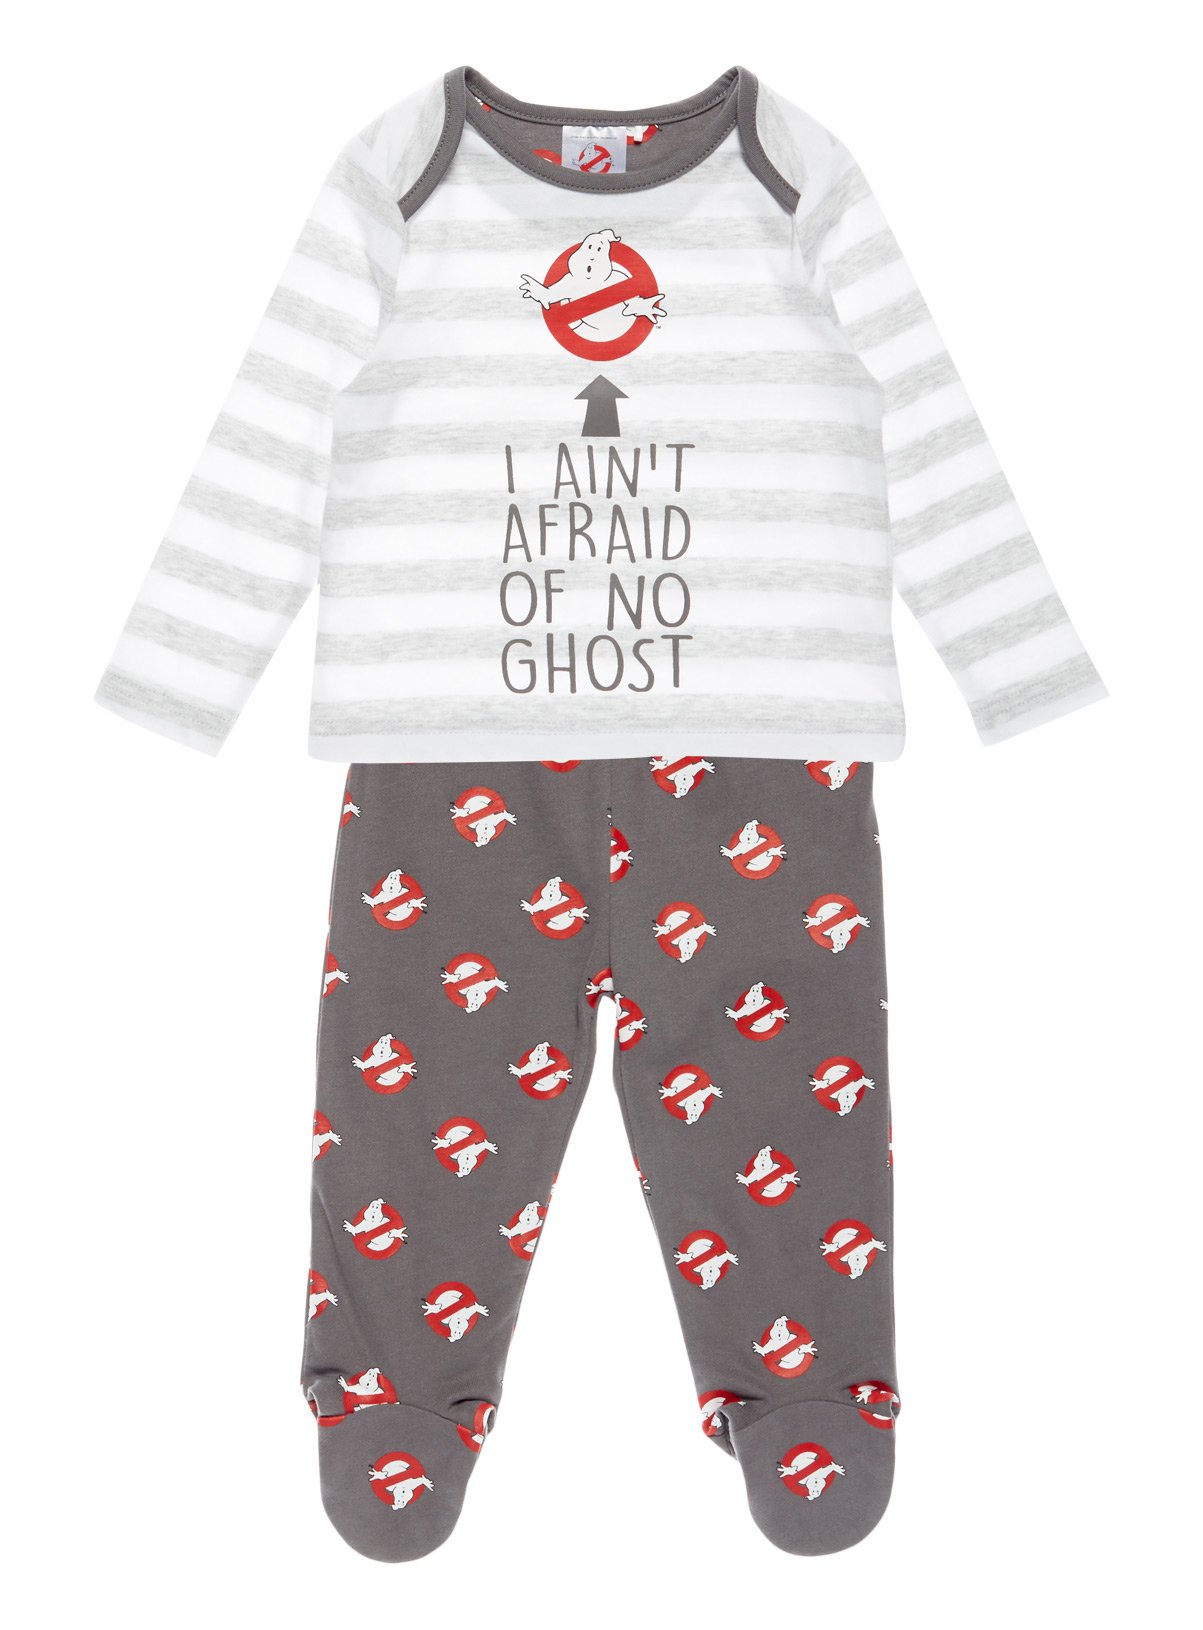 GHOSTBUSTERS ROMPER I Aint Afraid of no Ghosts BABY ONE PIECE